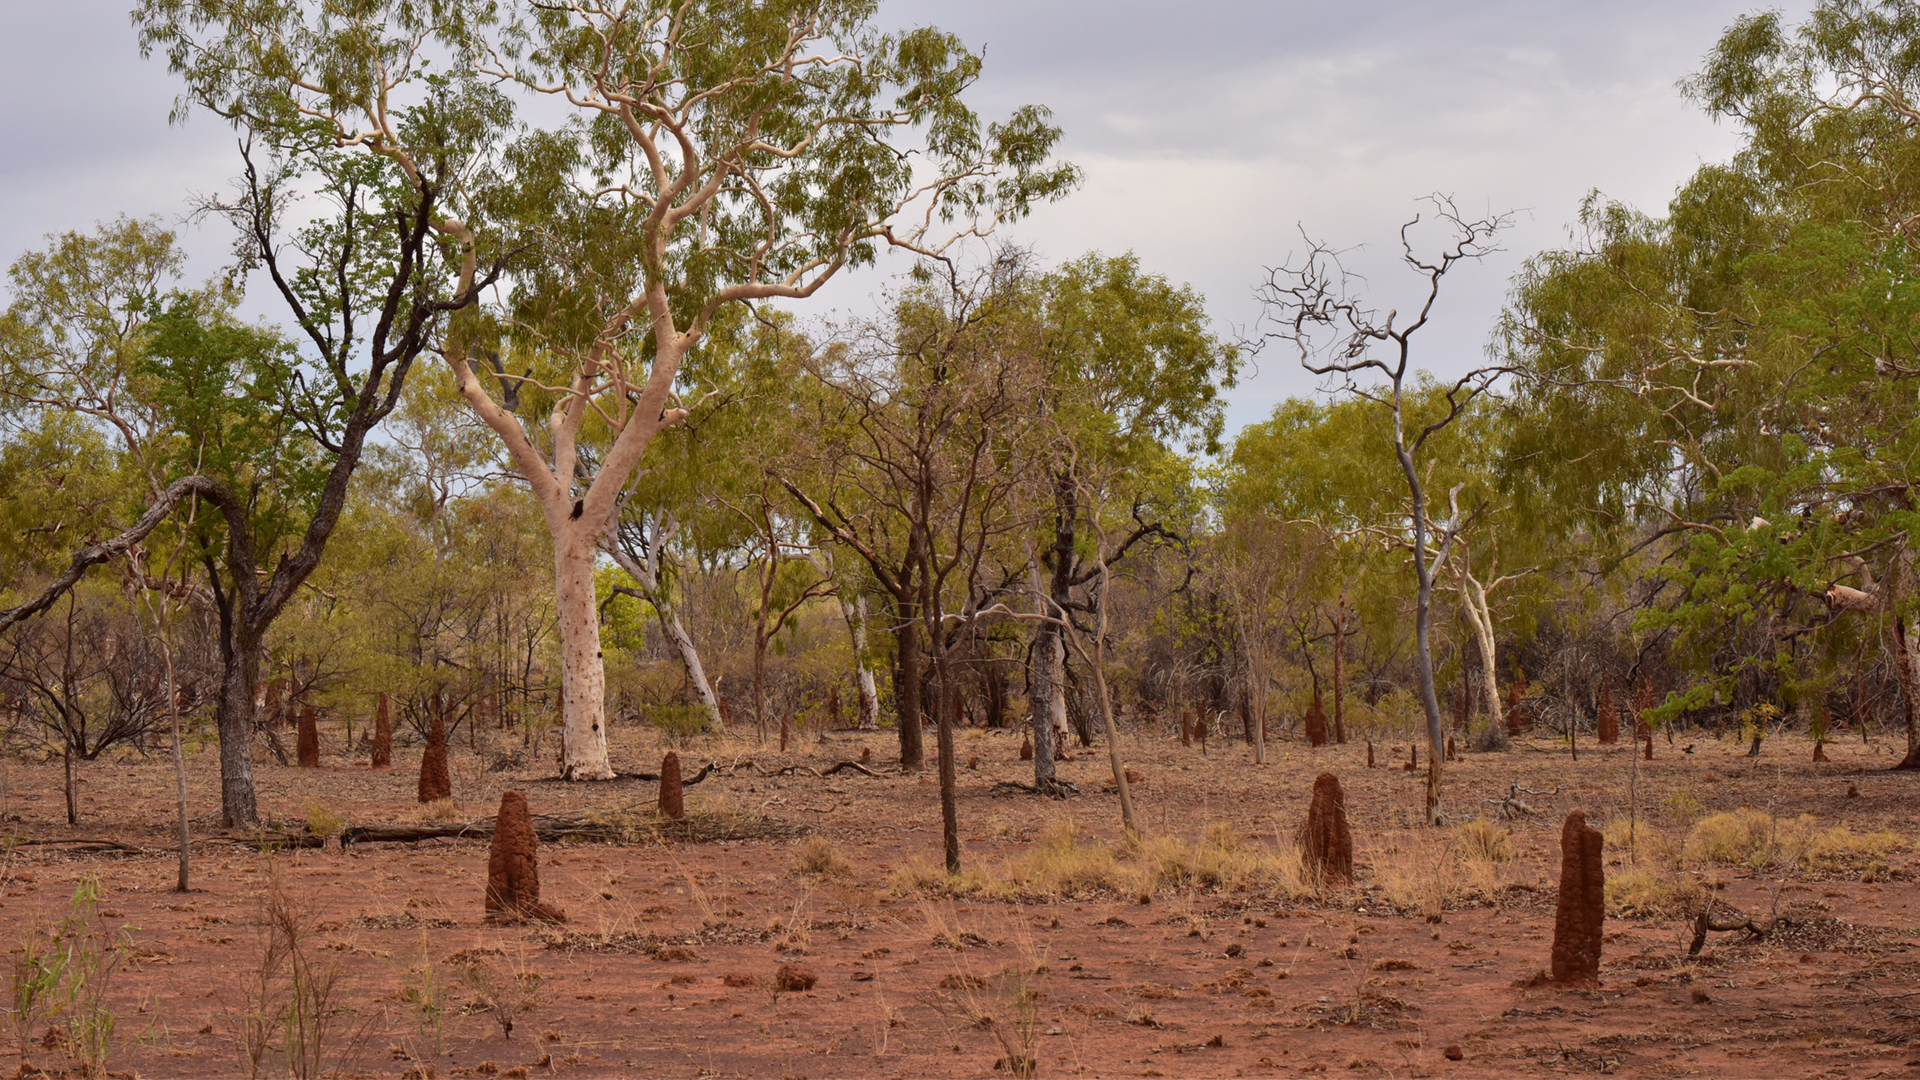 Trees, bushes and ant mounds in Beetoota basin